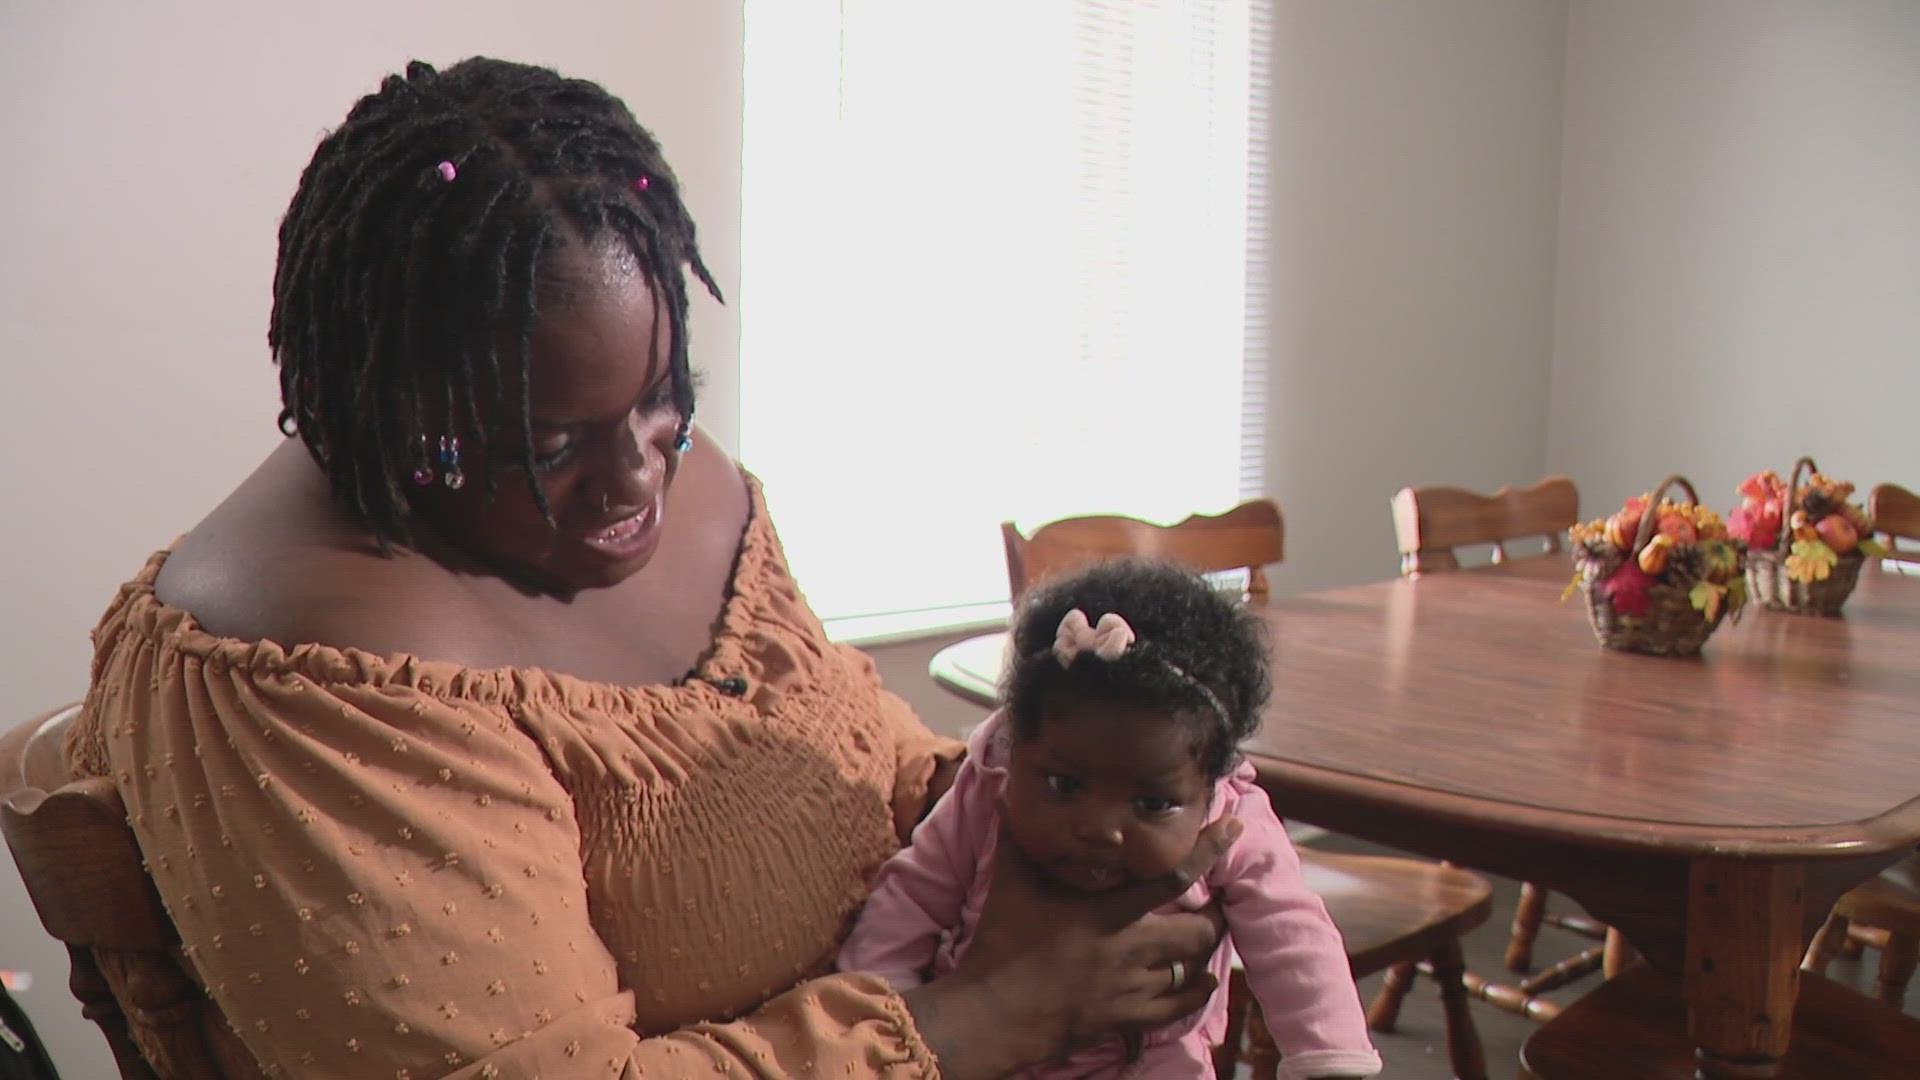 An estimated 250 moms & babies in Indianapolis are currently housing insecure.